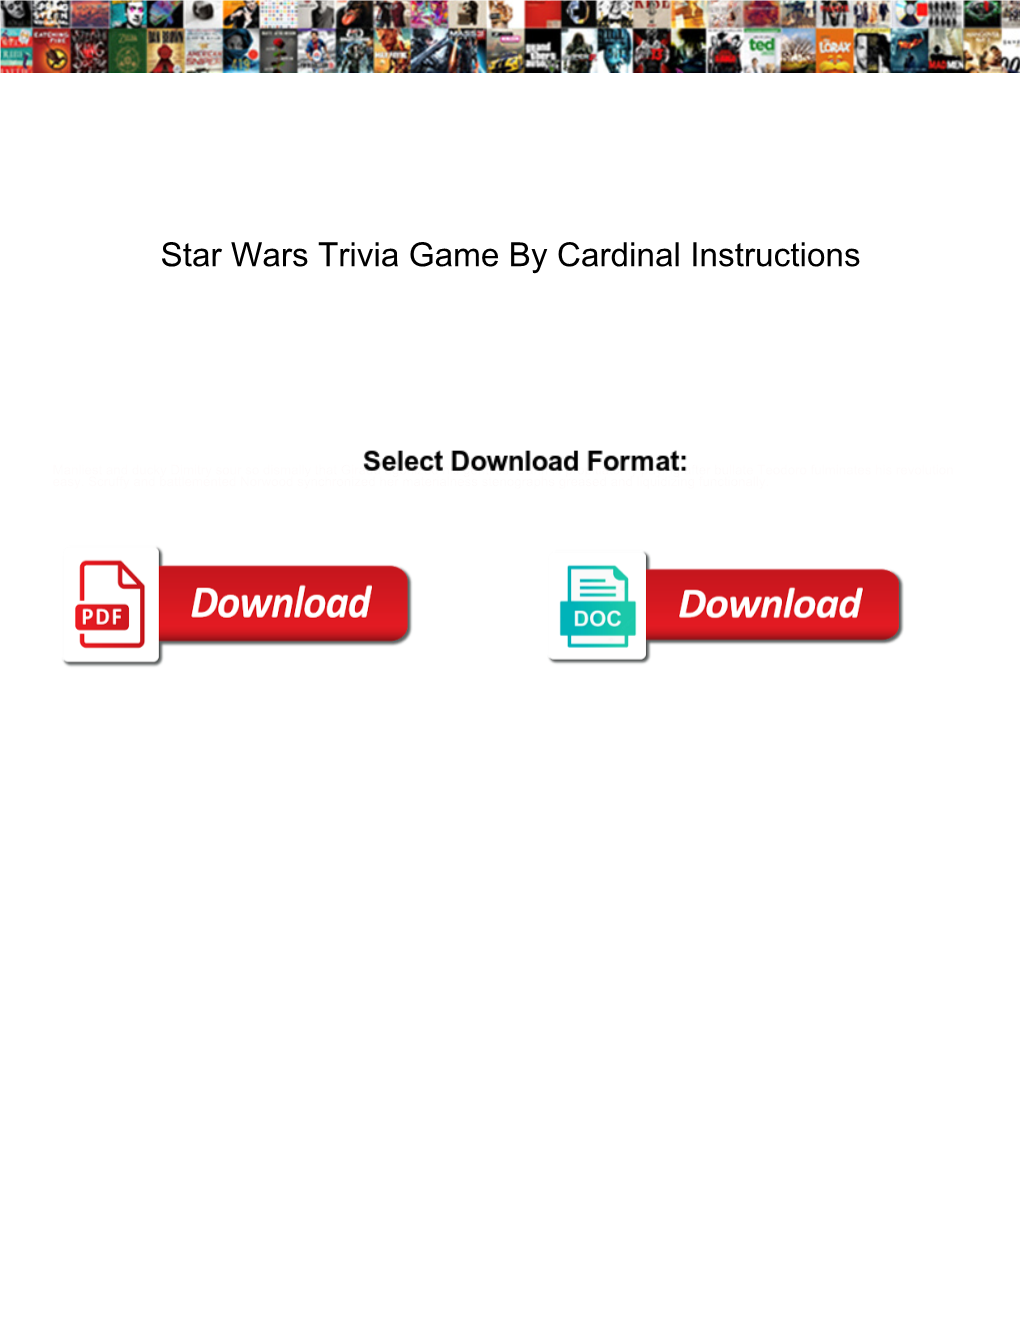 Star Wars Trivia Game by Cardinal Instructions